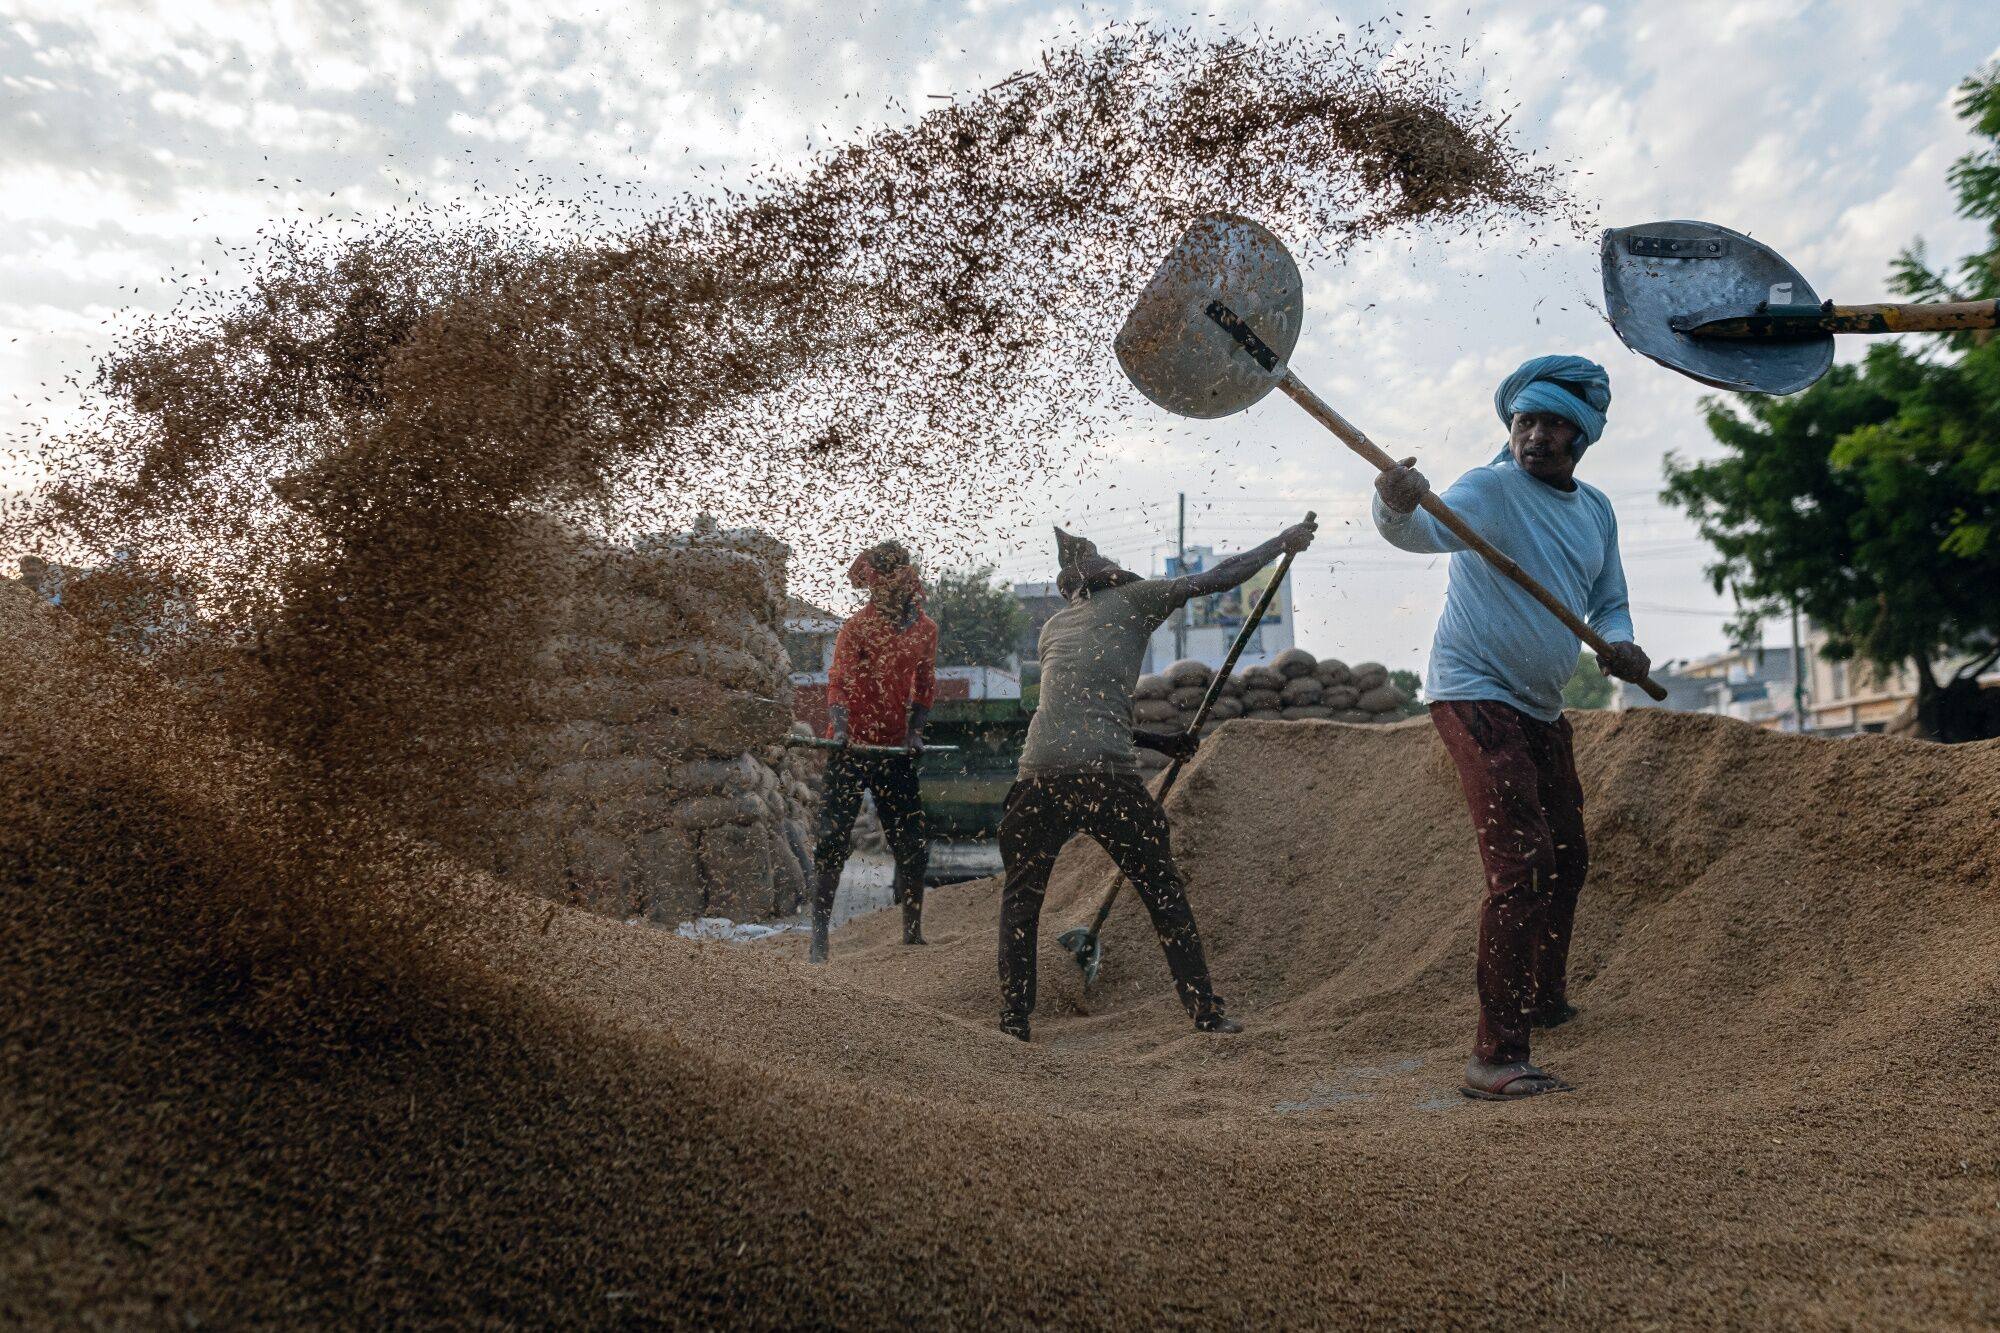 Workers shovel harvested rice onto a pile to dry at a wholesale market in Narvana, India. India is the world’s top rice exporter, accounting for around 40 per cent of global rice shipments and exporting to more than 150 countries. Photo: Bloomberg